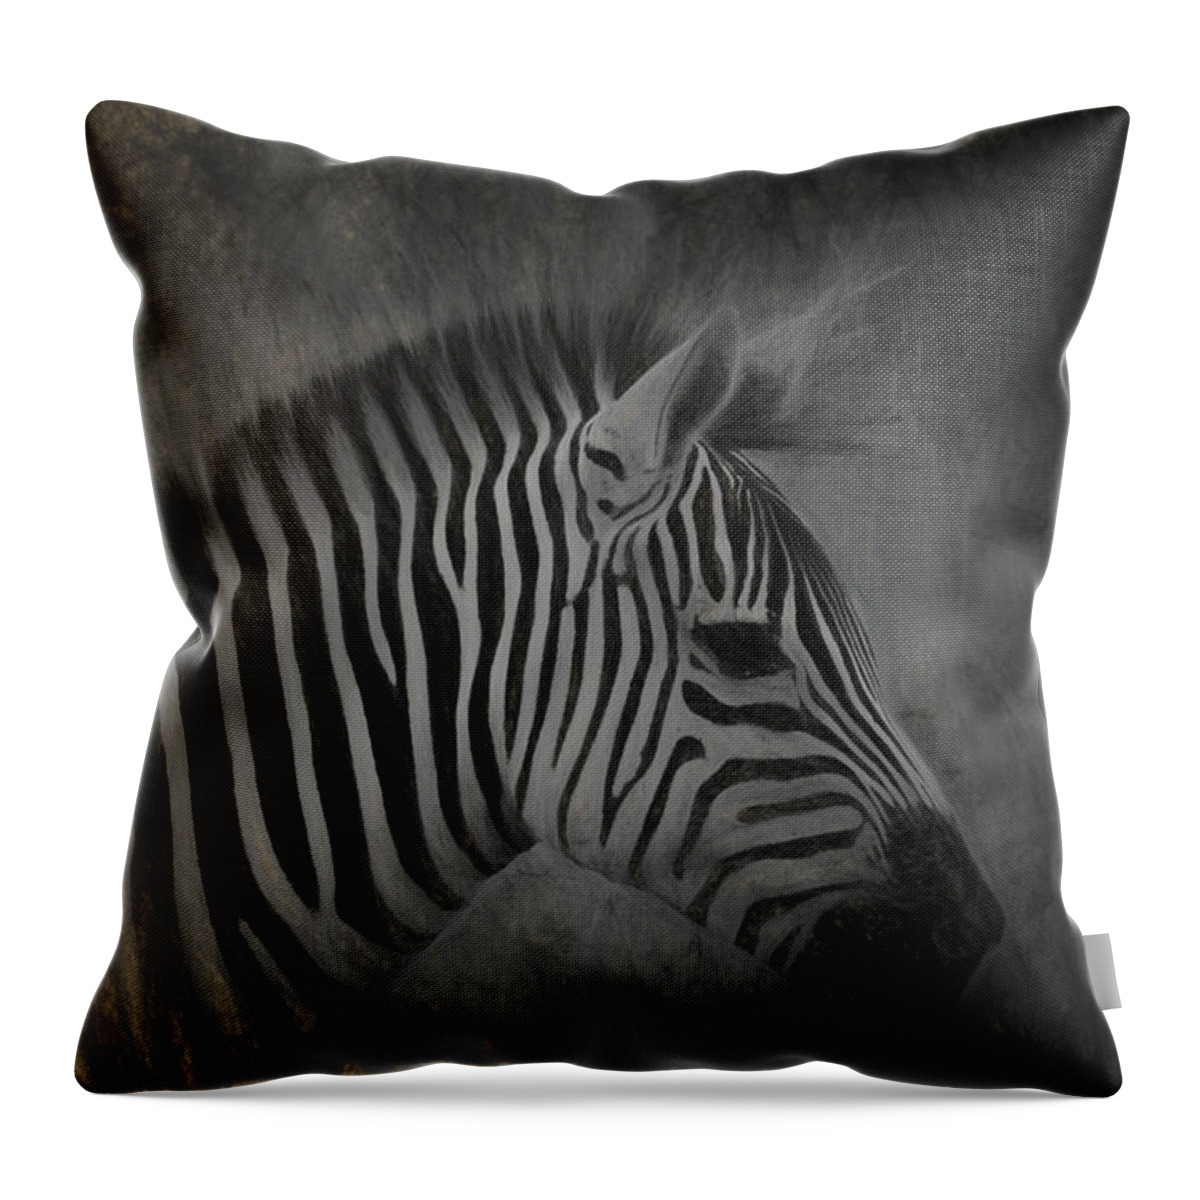 Zebra Throw Pillow featuring the photograph Zebra Portrait Photo Sketch by Artful Imagery